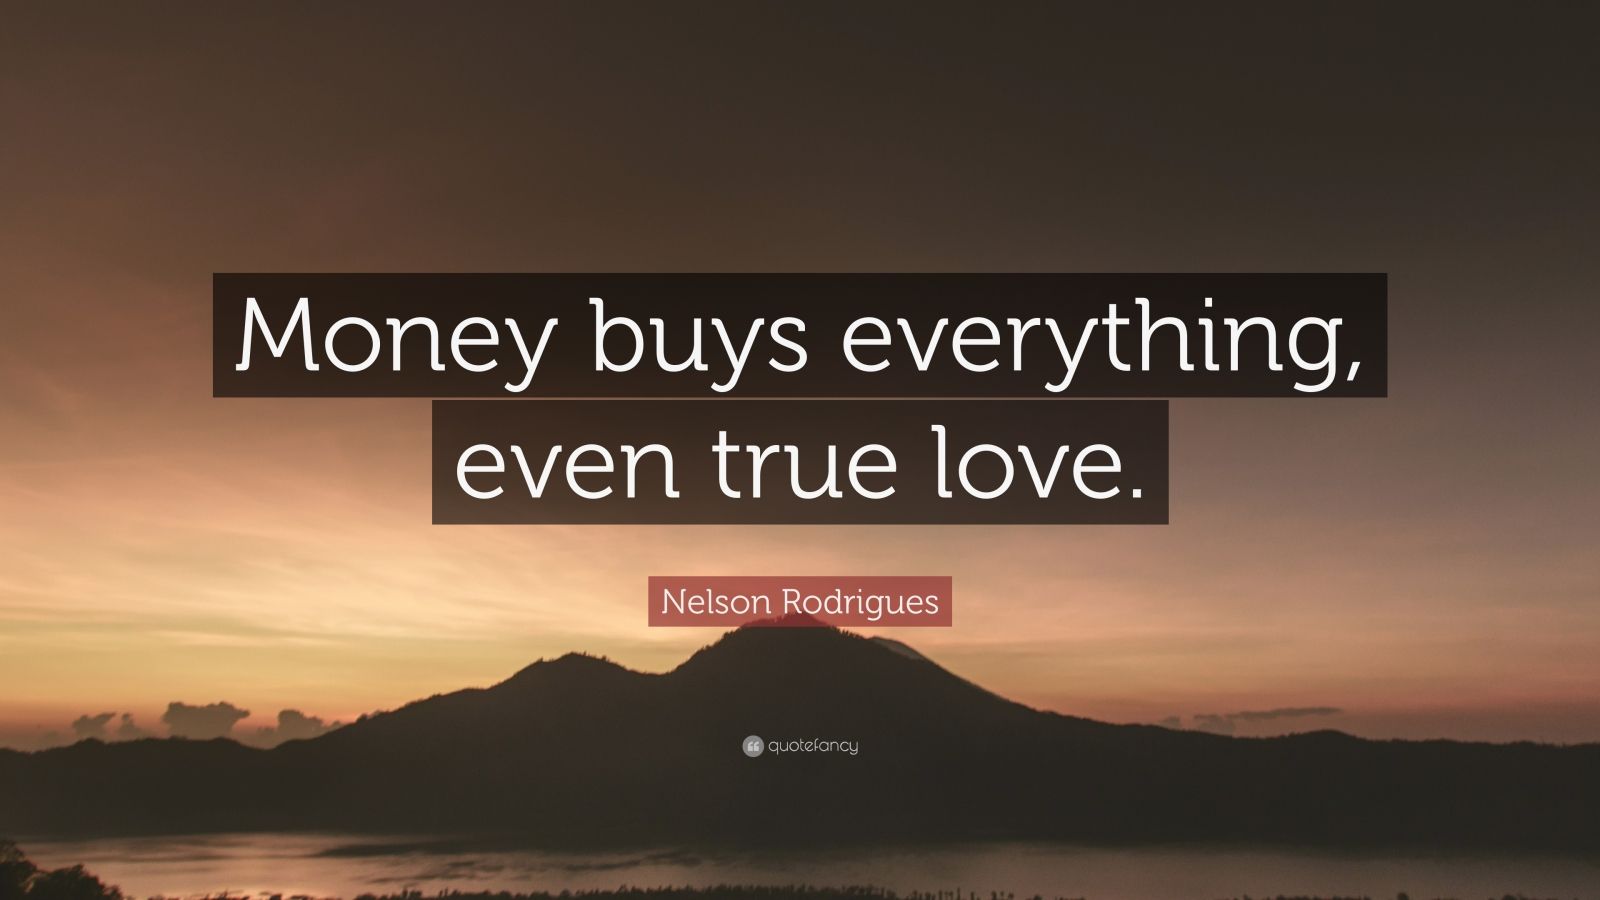 Nelson Rodrigues Quote “Money buys everything, even true